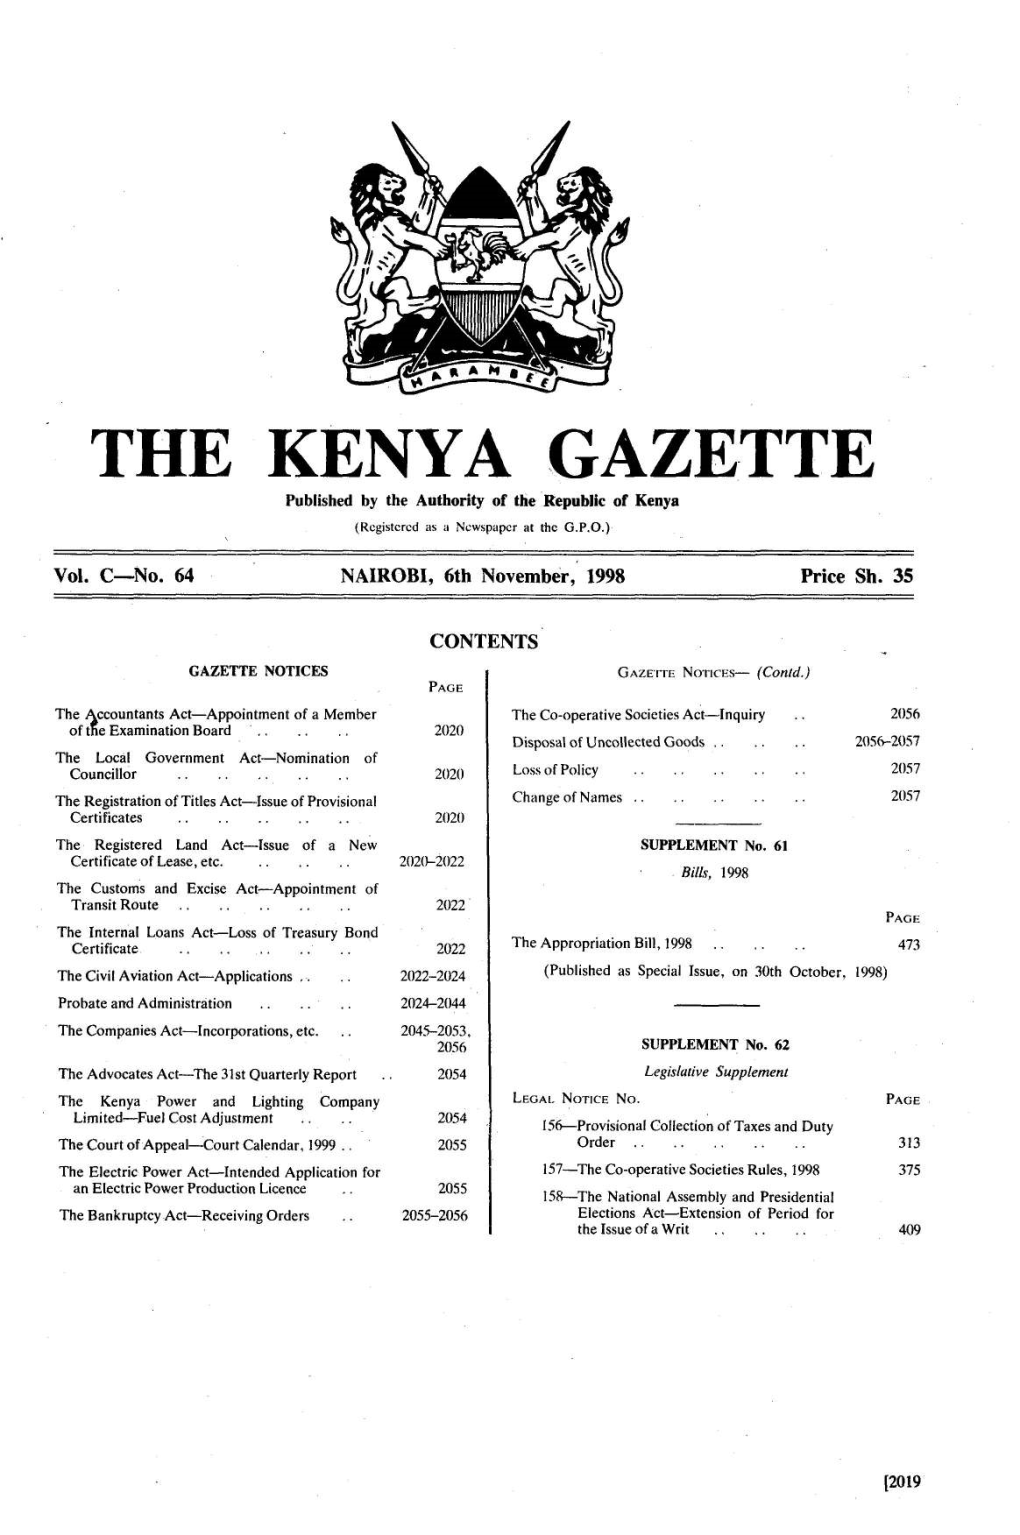 THE KENYA GAZETTE Published by the Authority of the Republic of Kenya